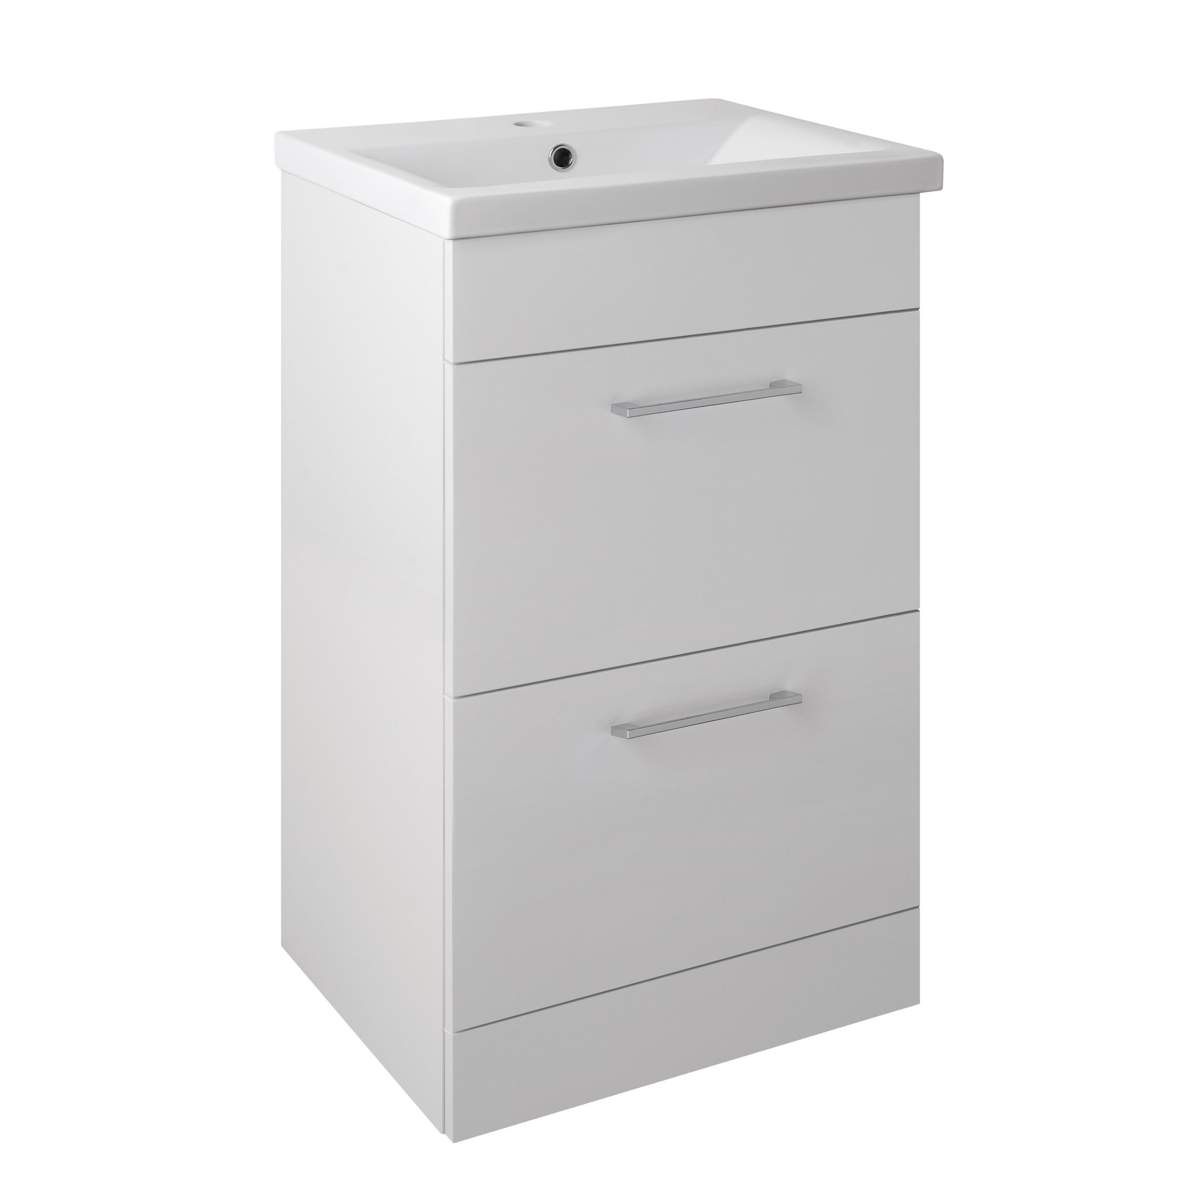 JTP Pace Units 500mm Floor Standing Unit with Drawers and Basin in White (PFS501W + P500BS)